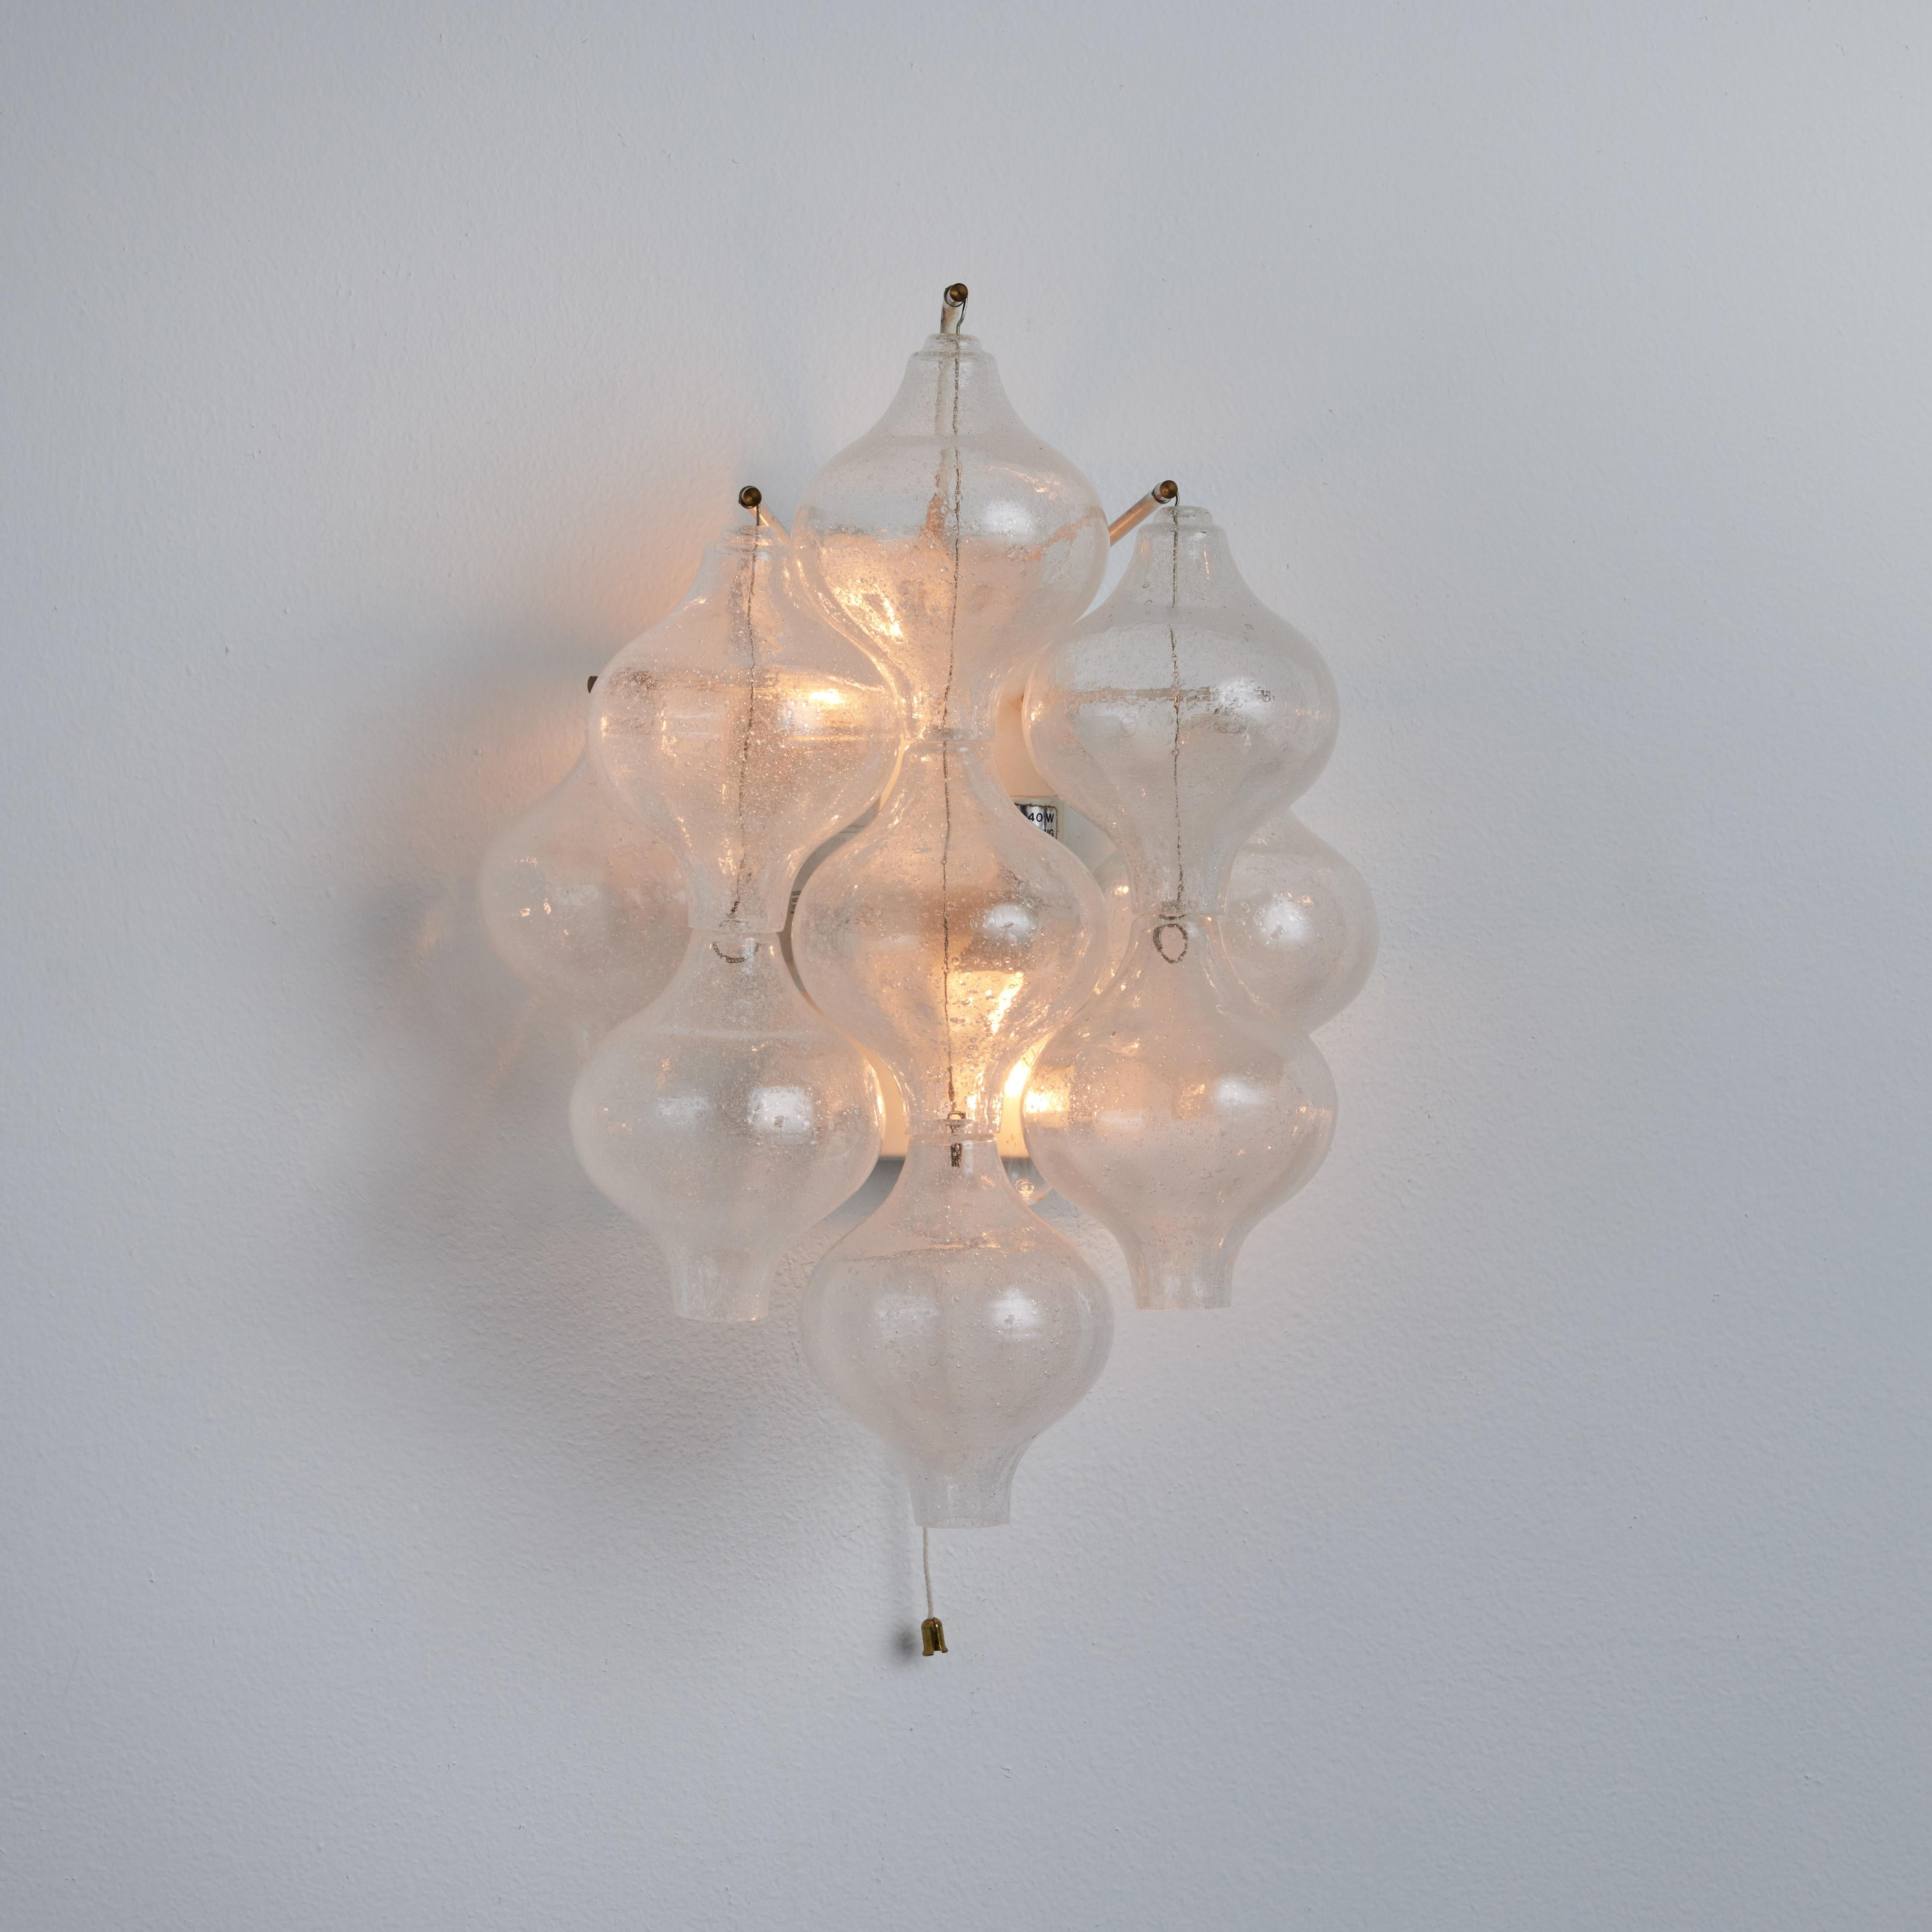 JT Kalmar 'Tulipan 9WA' 9-Globe Blown Murano Glass Wall Sconce. 

Executed in hand-blown Murano glass globes with a white painted metal structure and brass accents. Designed by JT Kalmar, many Kalmar Franken pieces of the era featured 'pulegoso', or